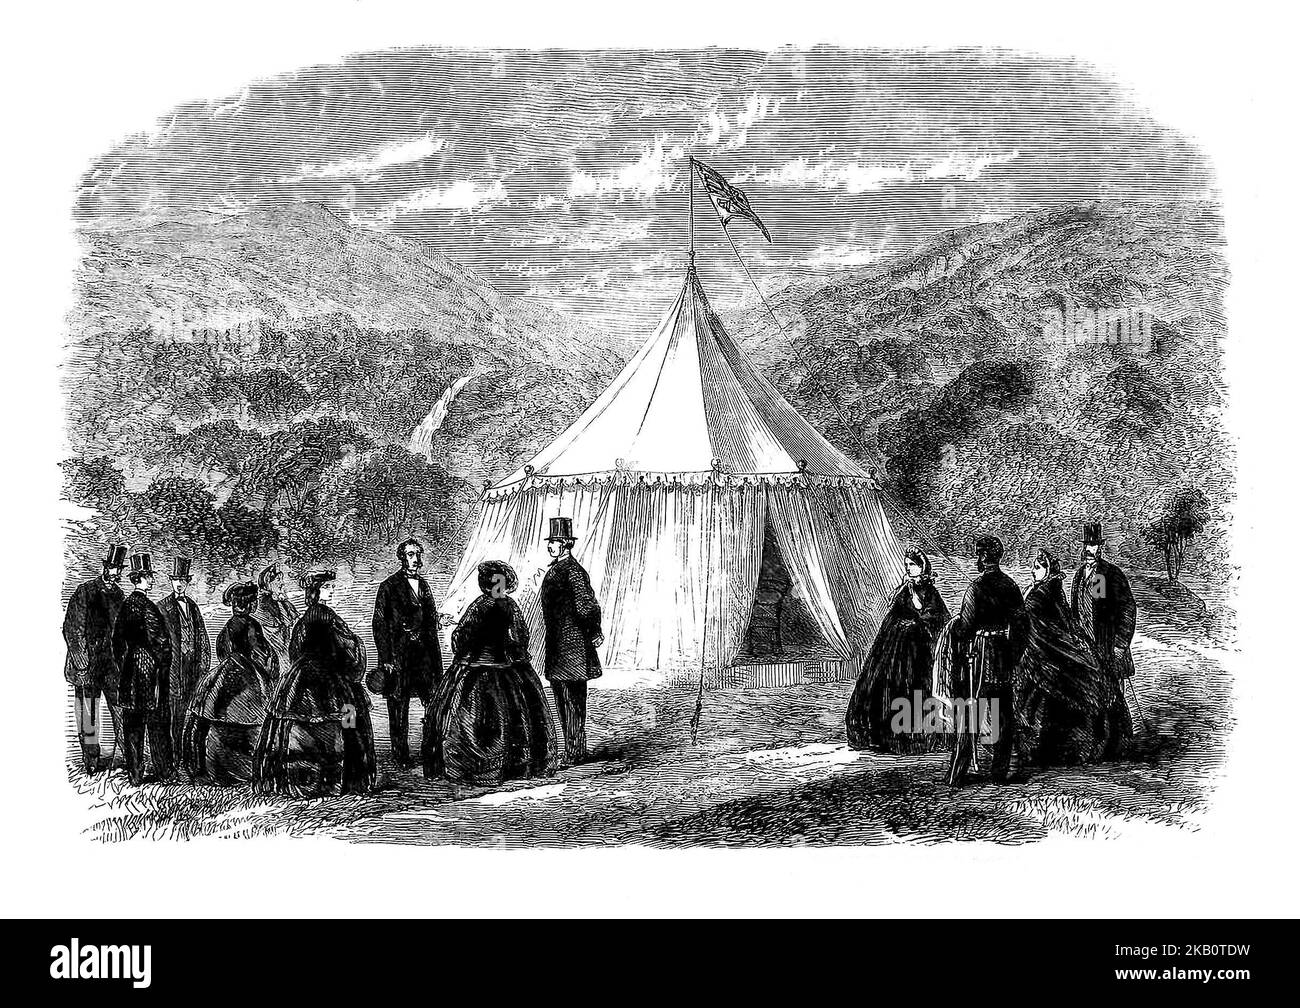 Queen Victoria and her husband Prince Albert at the Royal tent in Derrycunihy in Killarney, County Kerry. The monarch's third trip to Ireland in August, 1861 was to be extremely important for the Irish tourism industry and is credited with putting Killarney on the Irish tourism map. Stock Photo